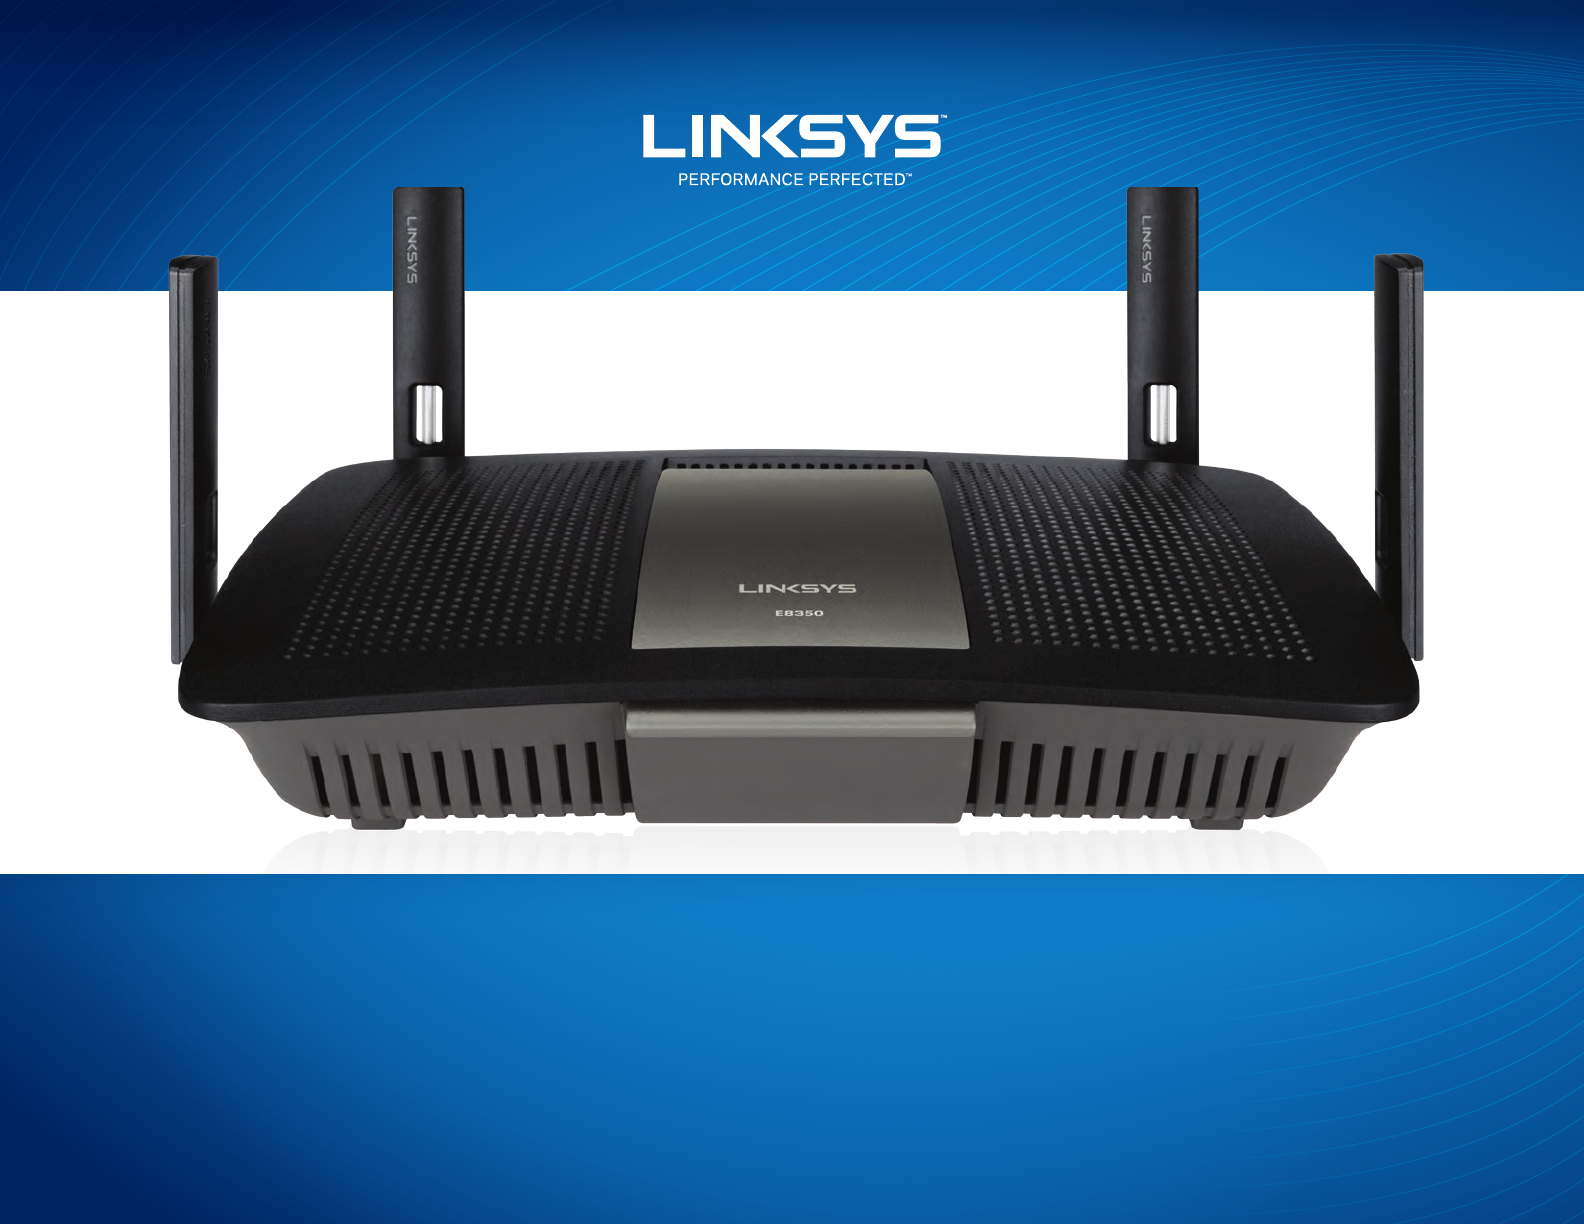 LINKSYS Linksys Wireless-AC Router User Manual User Guide Linksys E8350